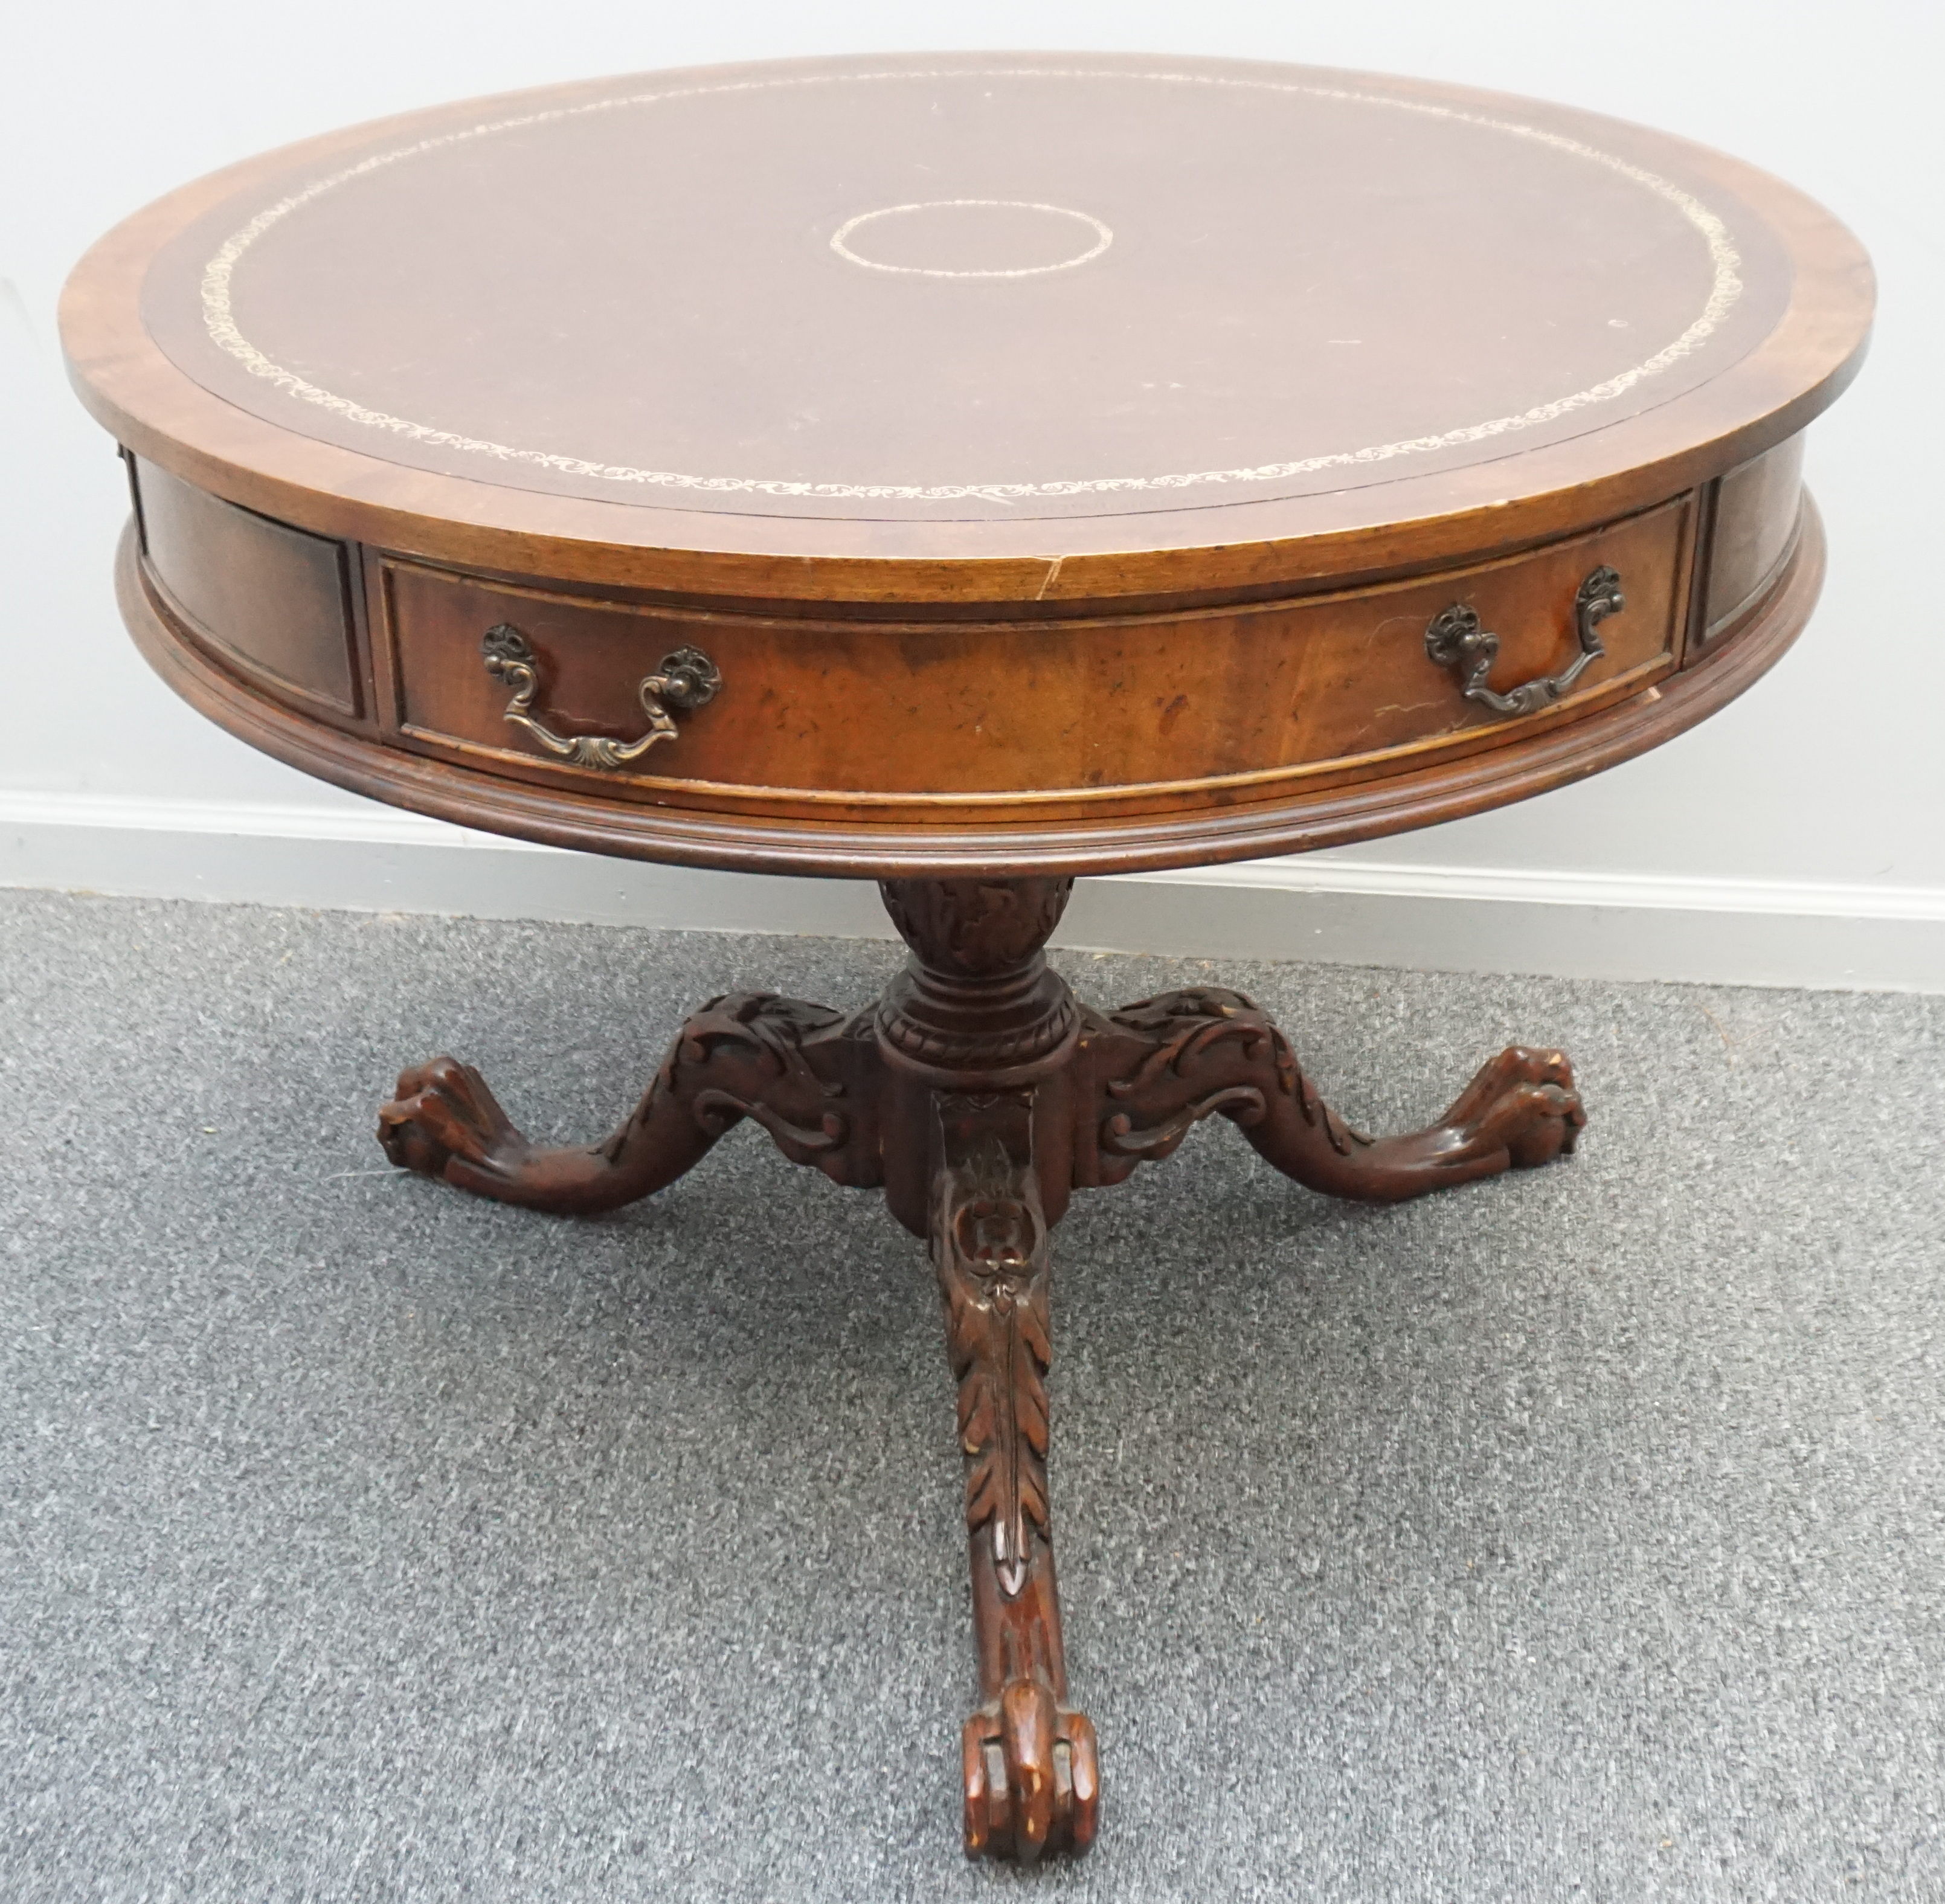 Mahogany Drum Table Lofty Marketplace, Leather Drum Table